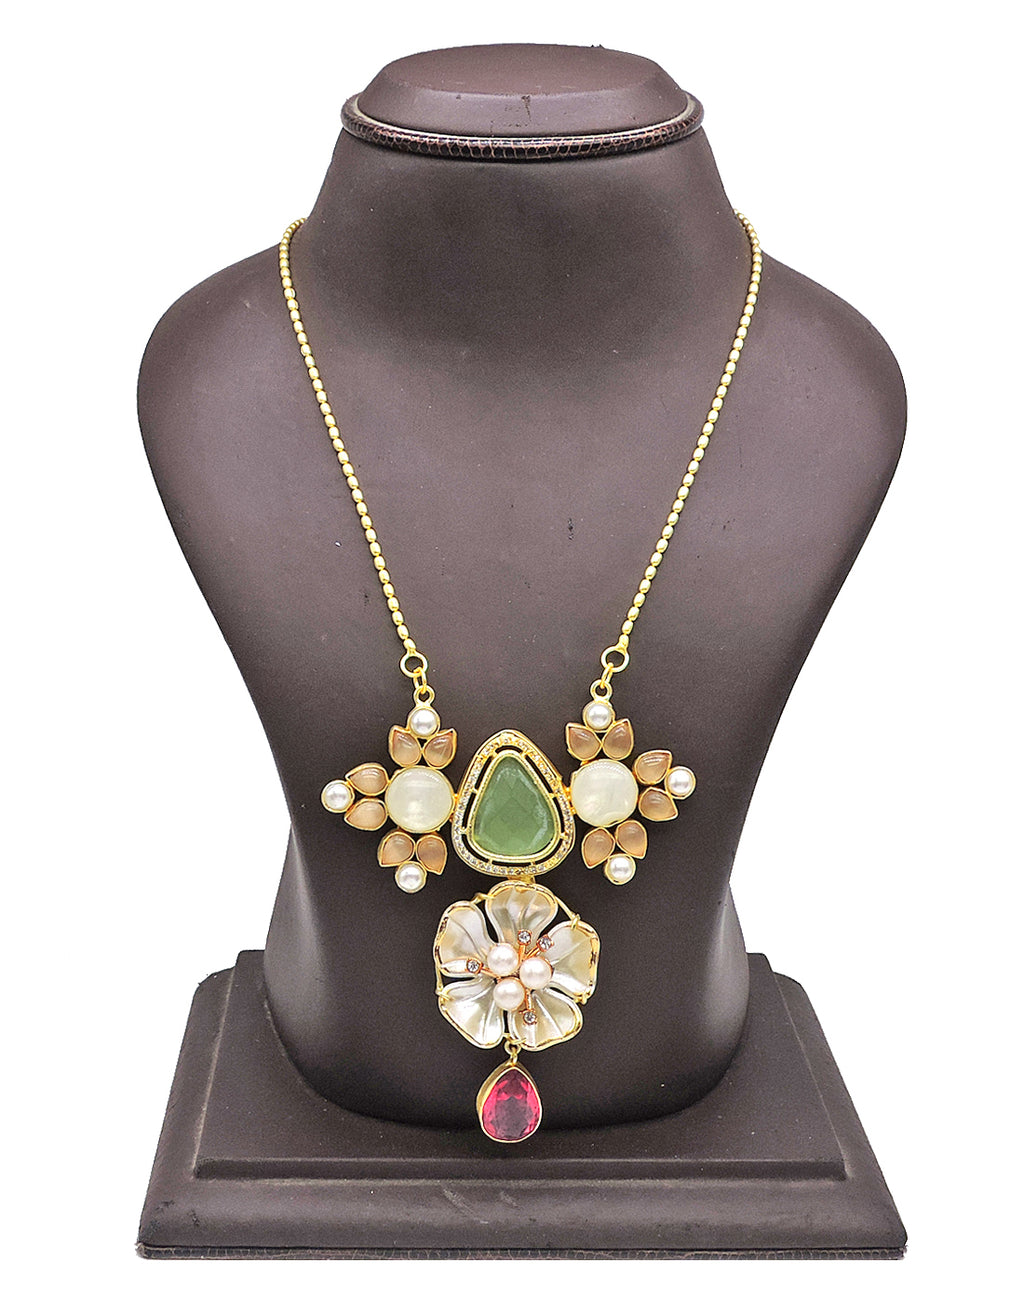 Crystal & Monalisa Necklace - Statement Necklaces - Gold-Plated & Hypoallergenic Jewellery - Made in India - Dubai Jewellery - Dori